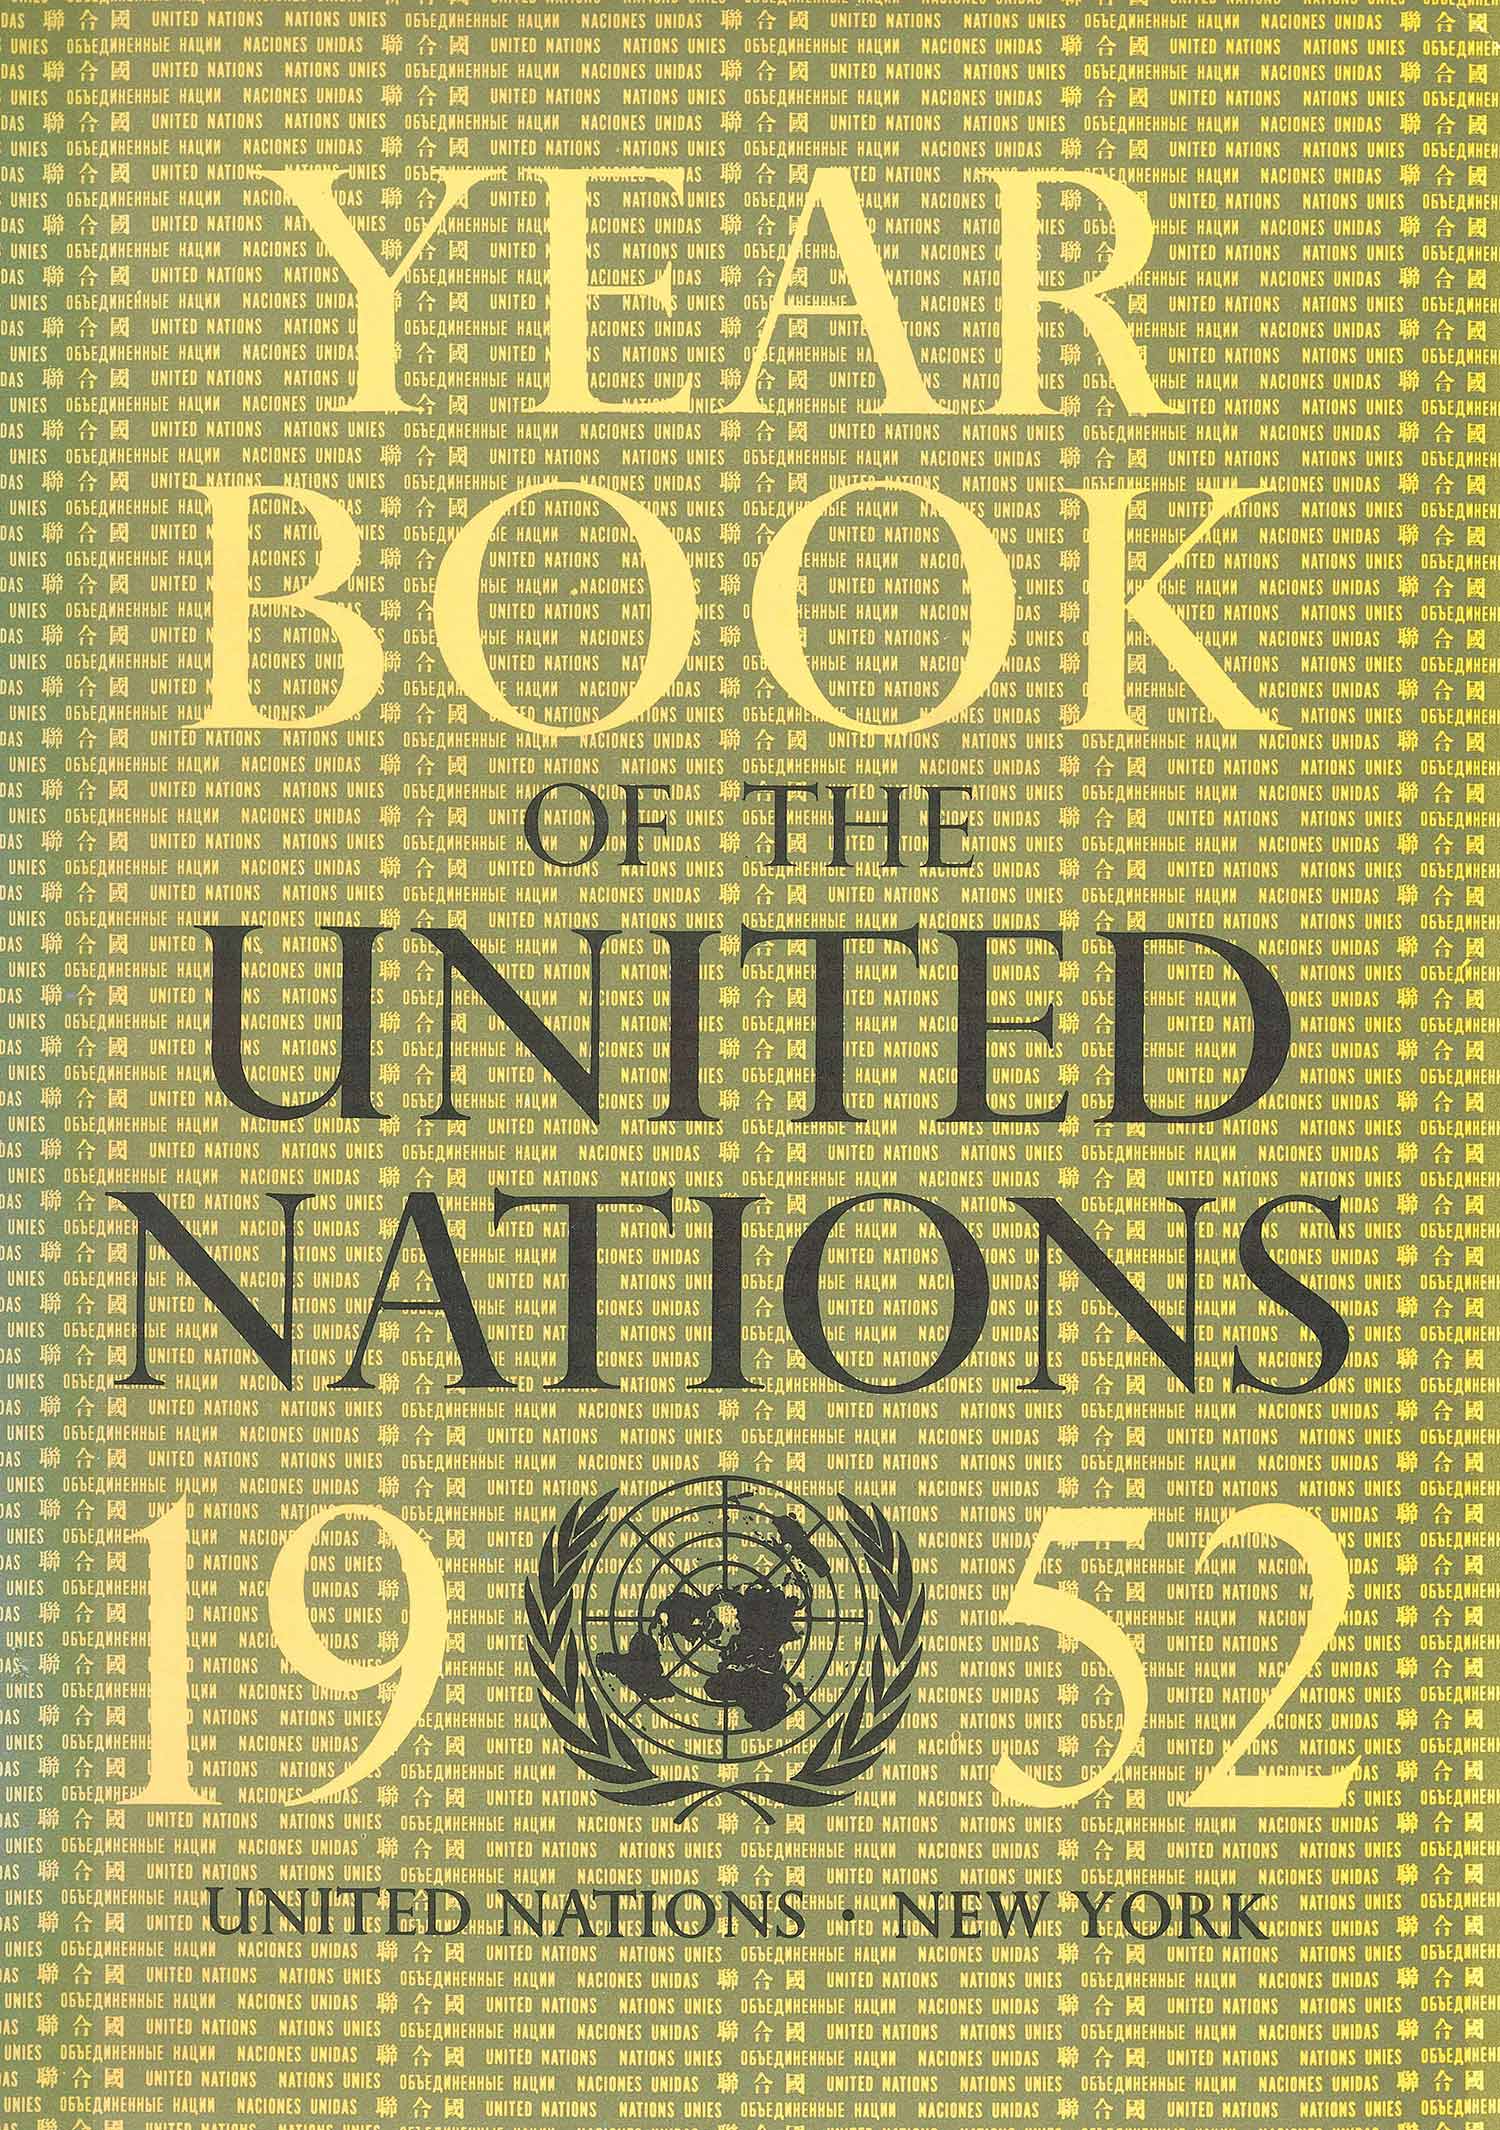 image of Yearbook of the United Nations 1952